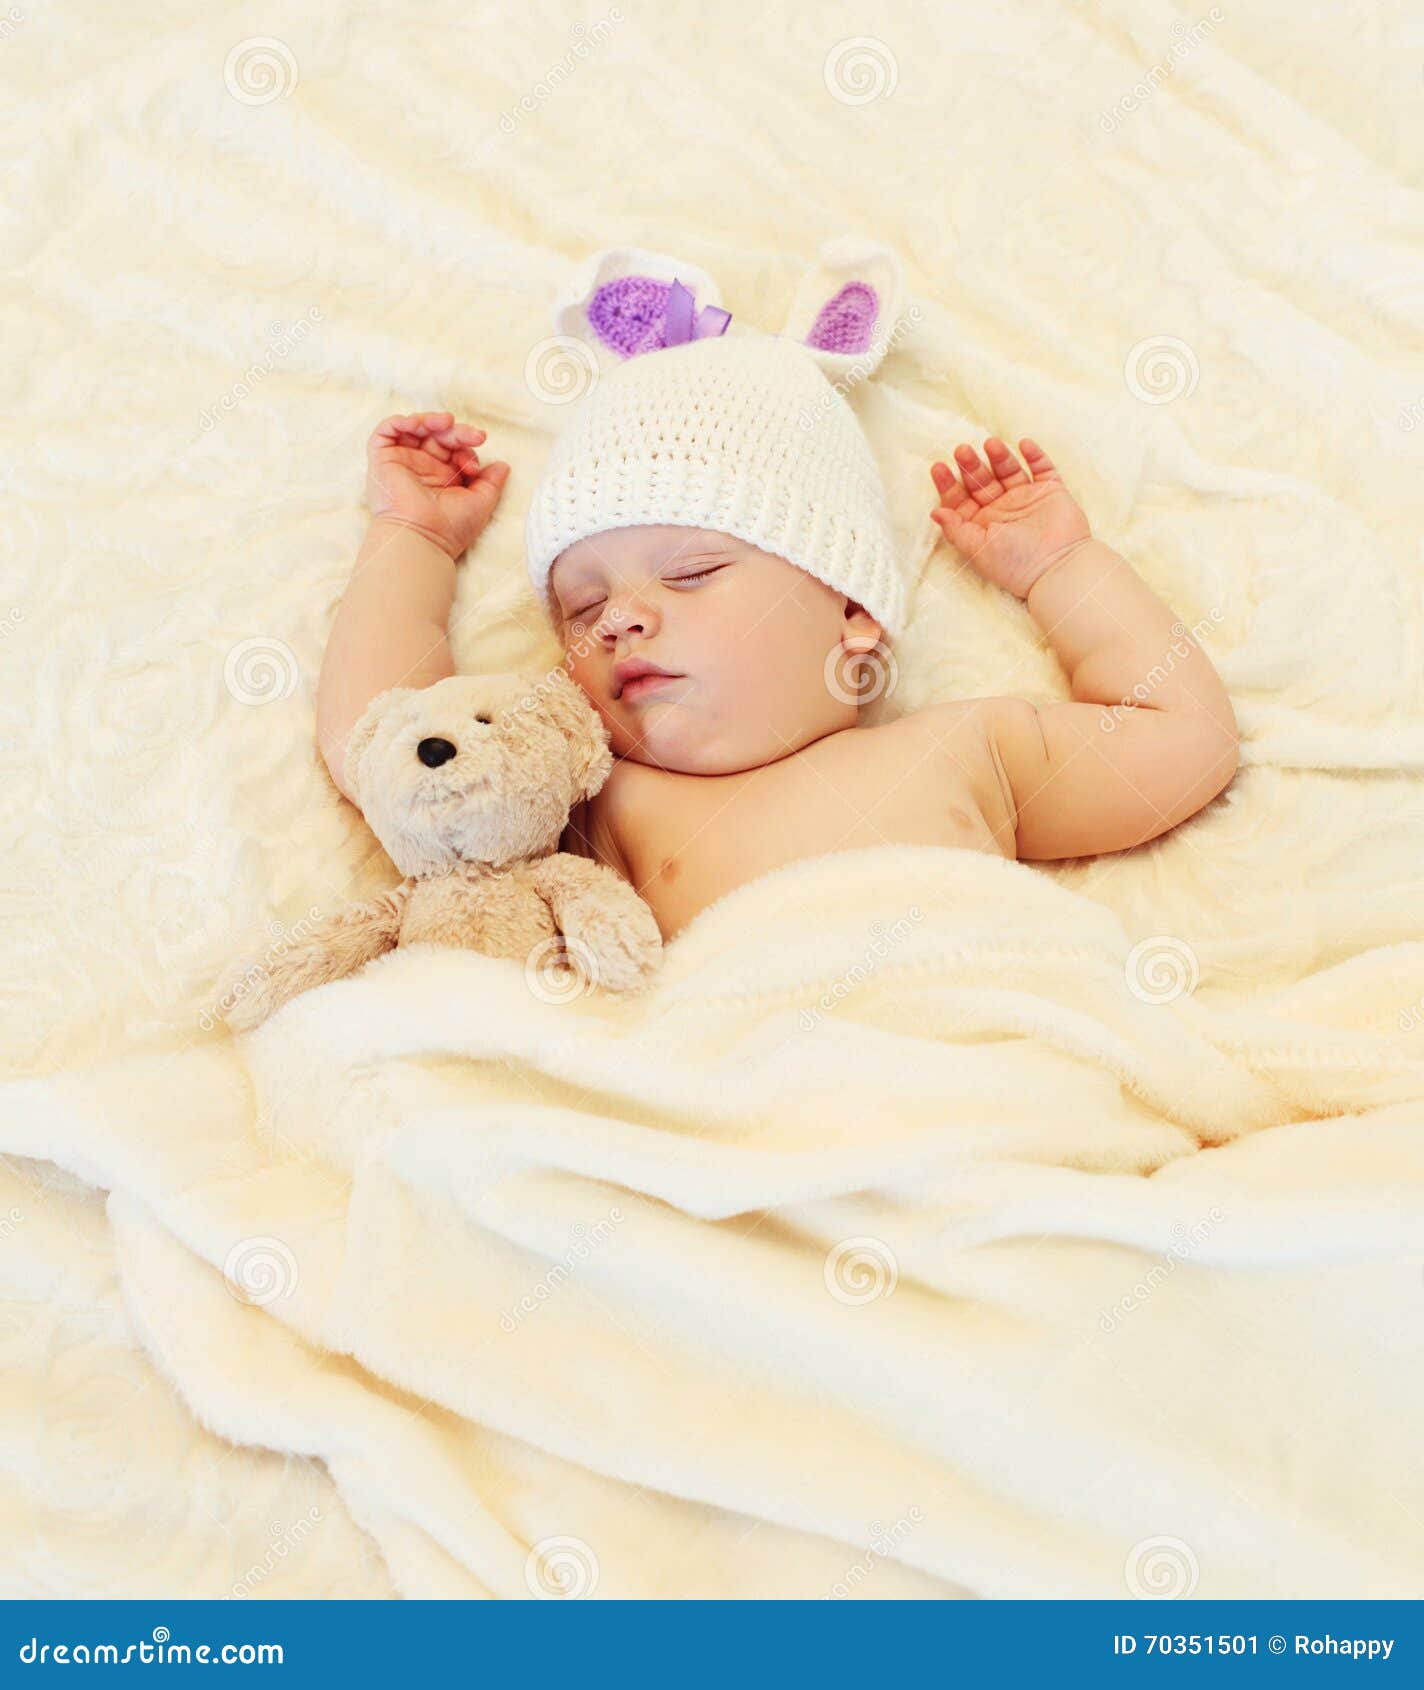 Cute Baby Sleeping with Teddy Bear on White Bed Home Stock Image ...